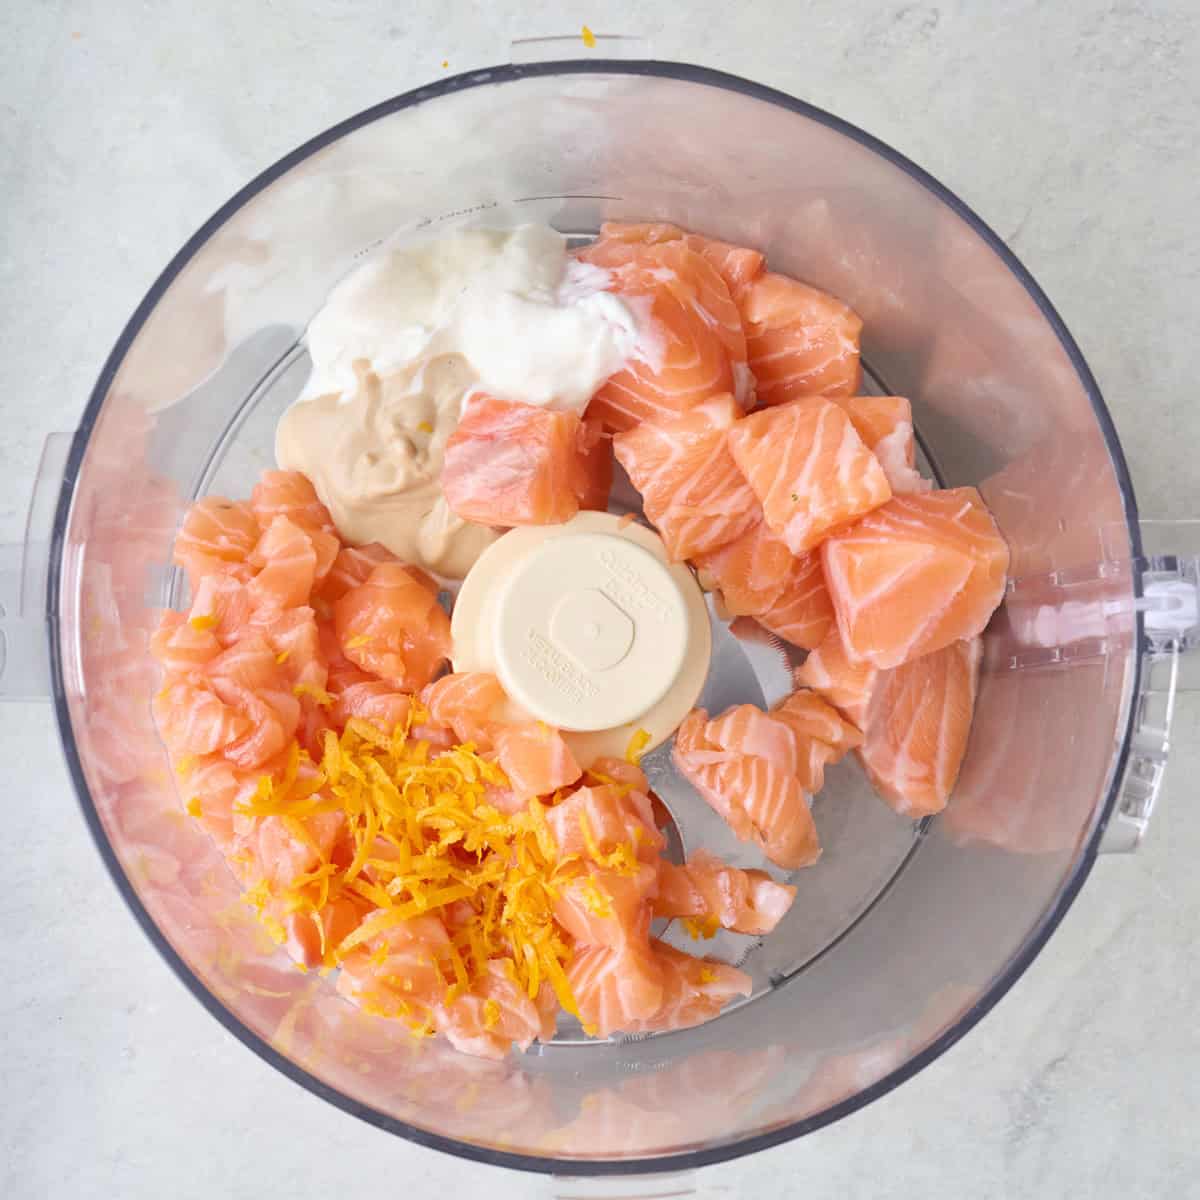 Pieces of salmon, yogurt, mustard, and lemon zest in the bowl of a food processor.